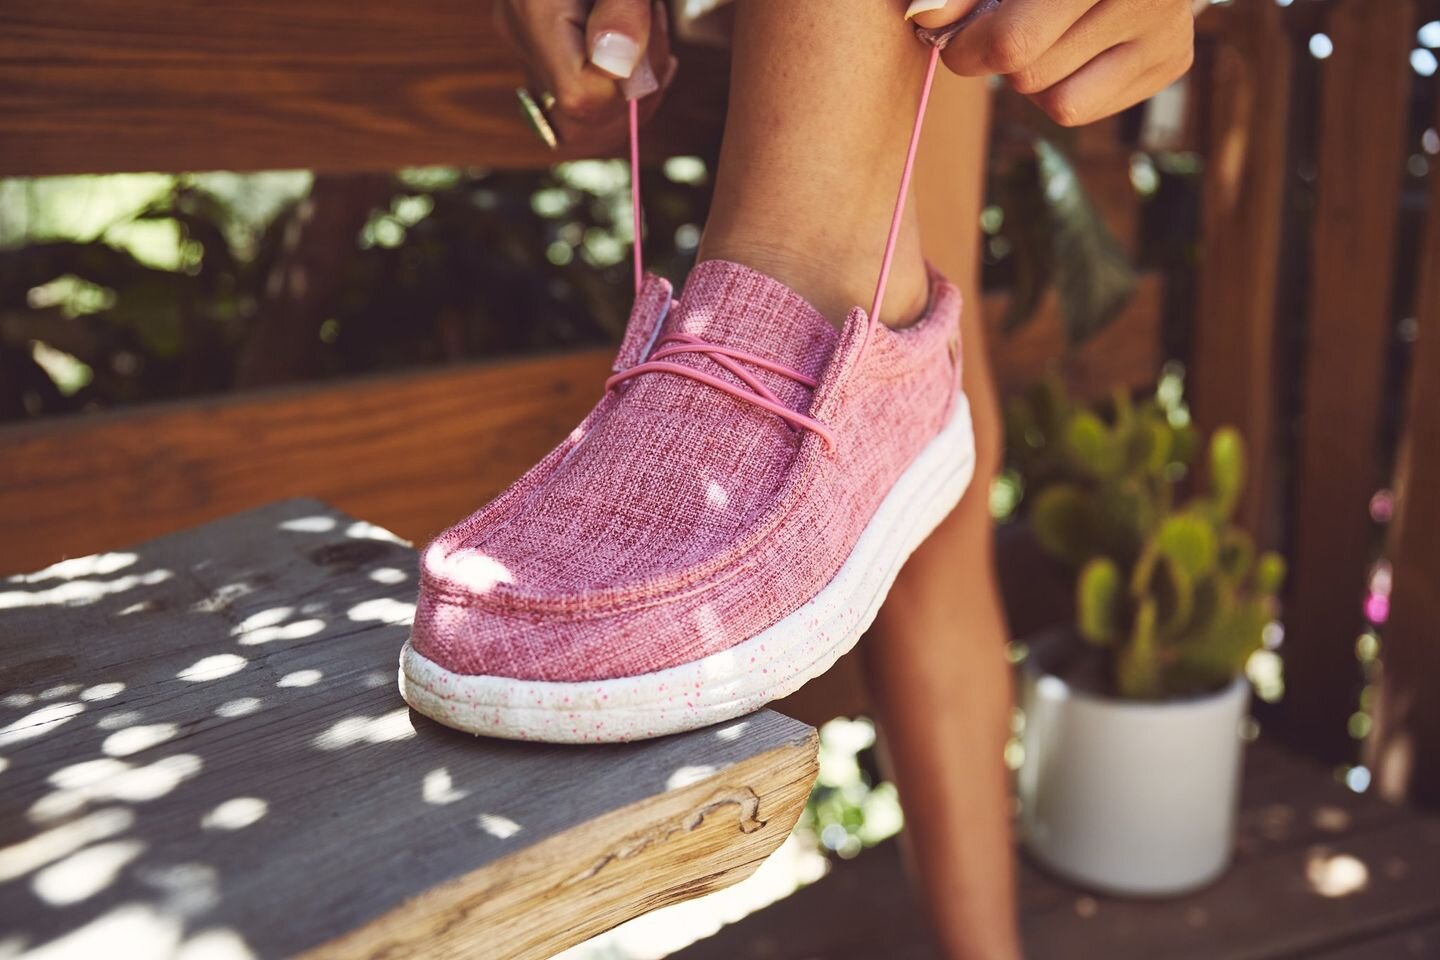 You know what we do on Wednesdays... We wear pink!💗

Lamo's Paula is a great pop of color to add to your summer outfits, and it's sure comfortable too!

www.michaelbshoes.com
#michaelb_shoes #loveyourshoes #lovemylamos #lamofootwear #comfortfootwear